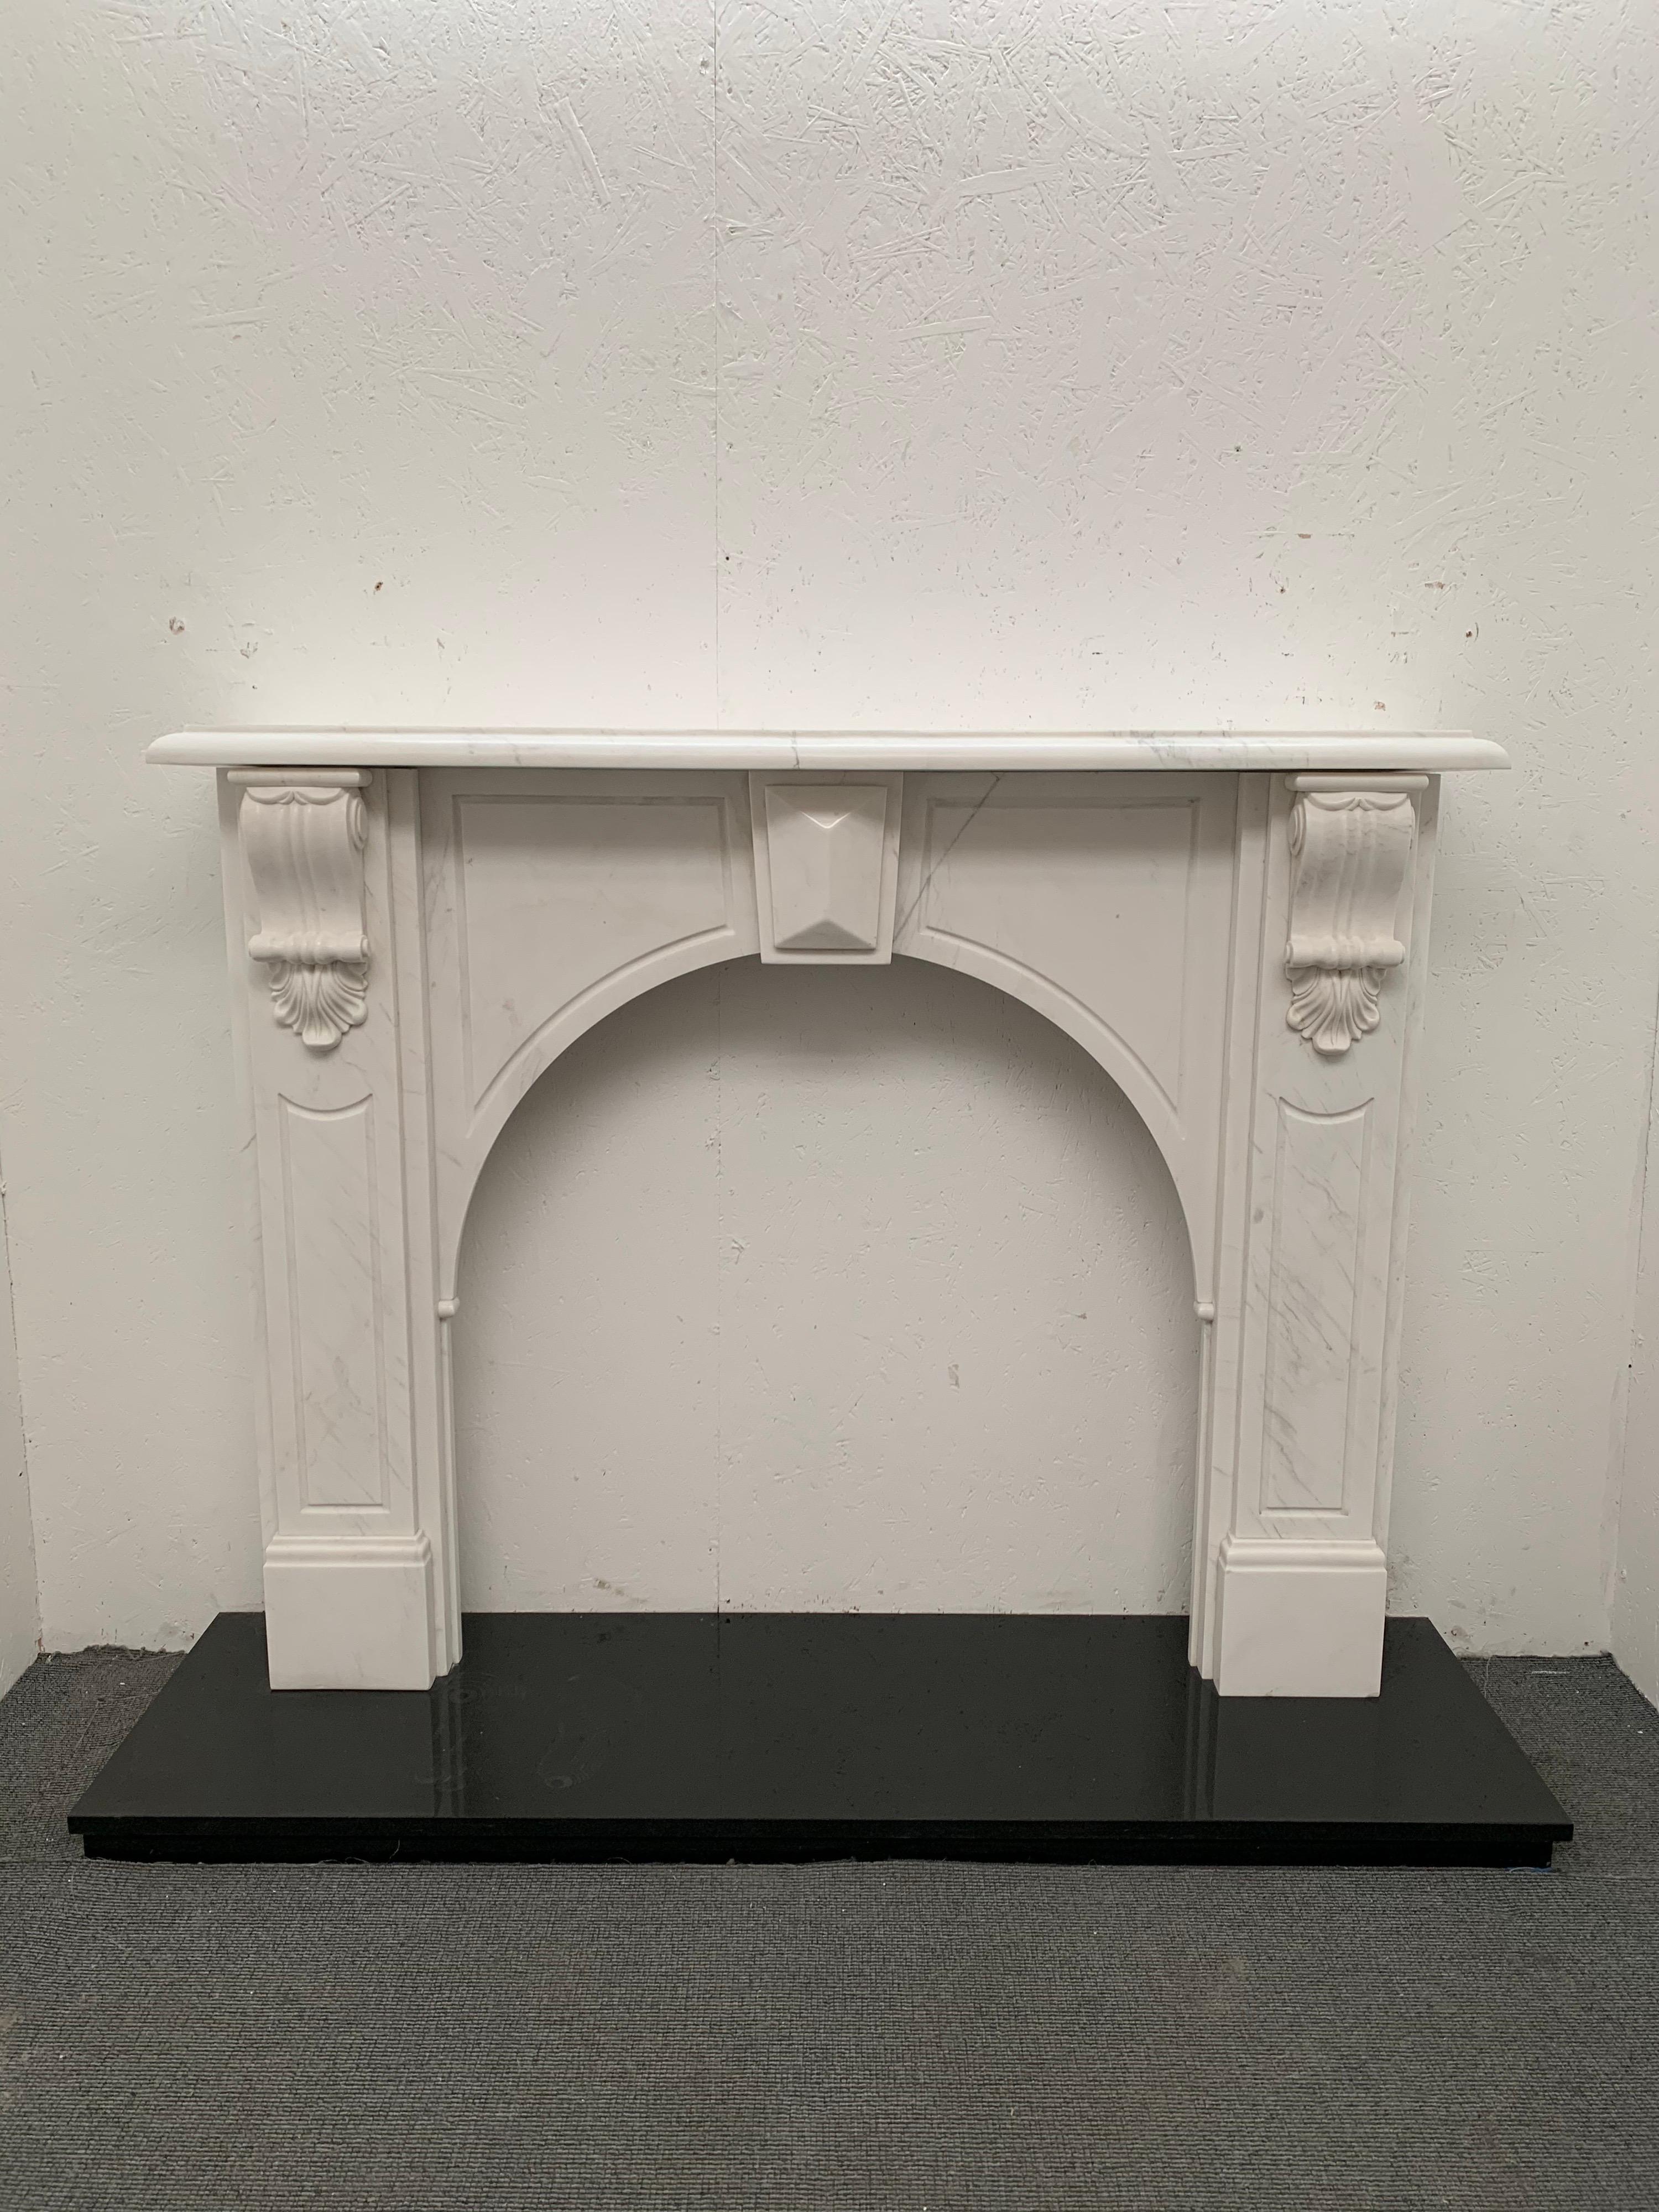 20th century Victorian styled arched carved corbel mantelpiece in a statuary white marble.
Finely hand carved corbels with centre tablet, semi bullnose shelf in traditional honed finish.
Minor fractor to the frieze as veinage but in good